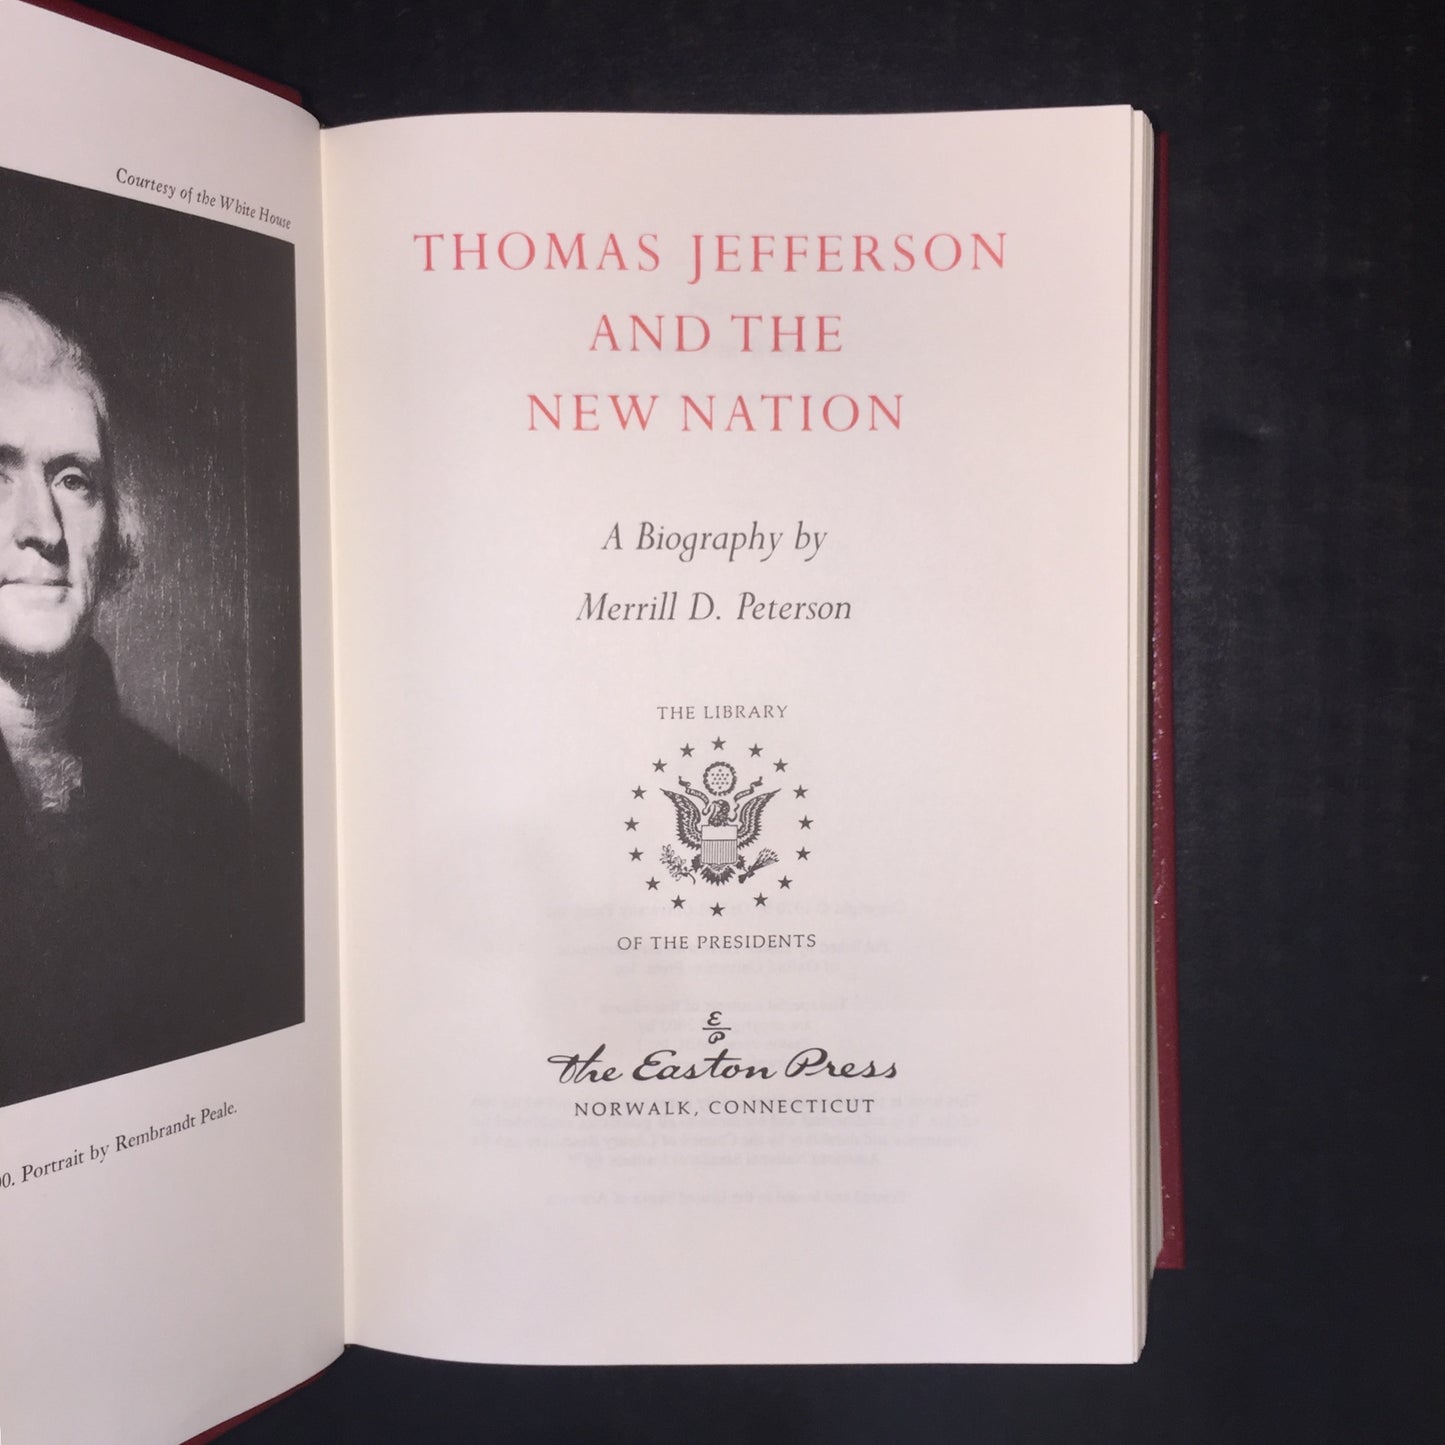 Thomas Jefferson and the New Nation - Merrill D. Peterson -Easton Press - 2003